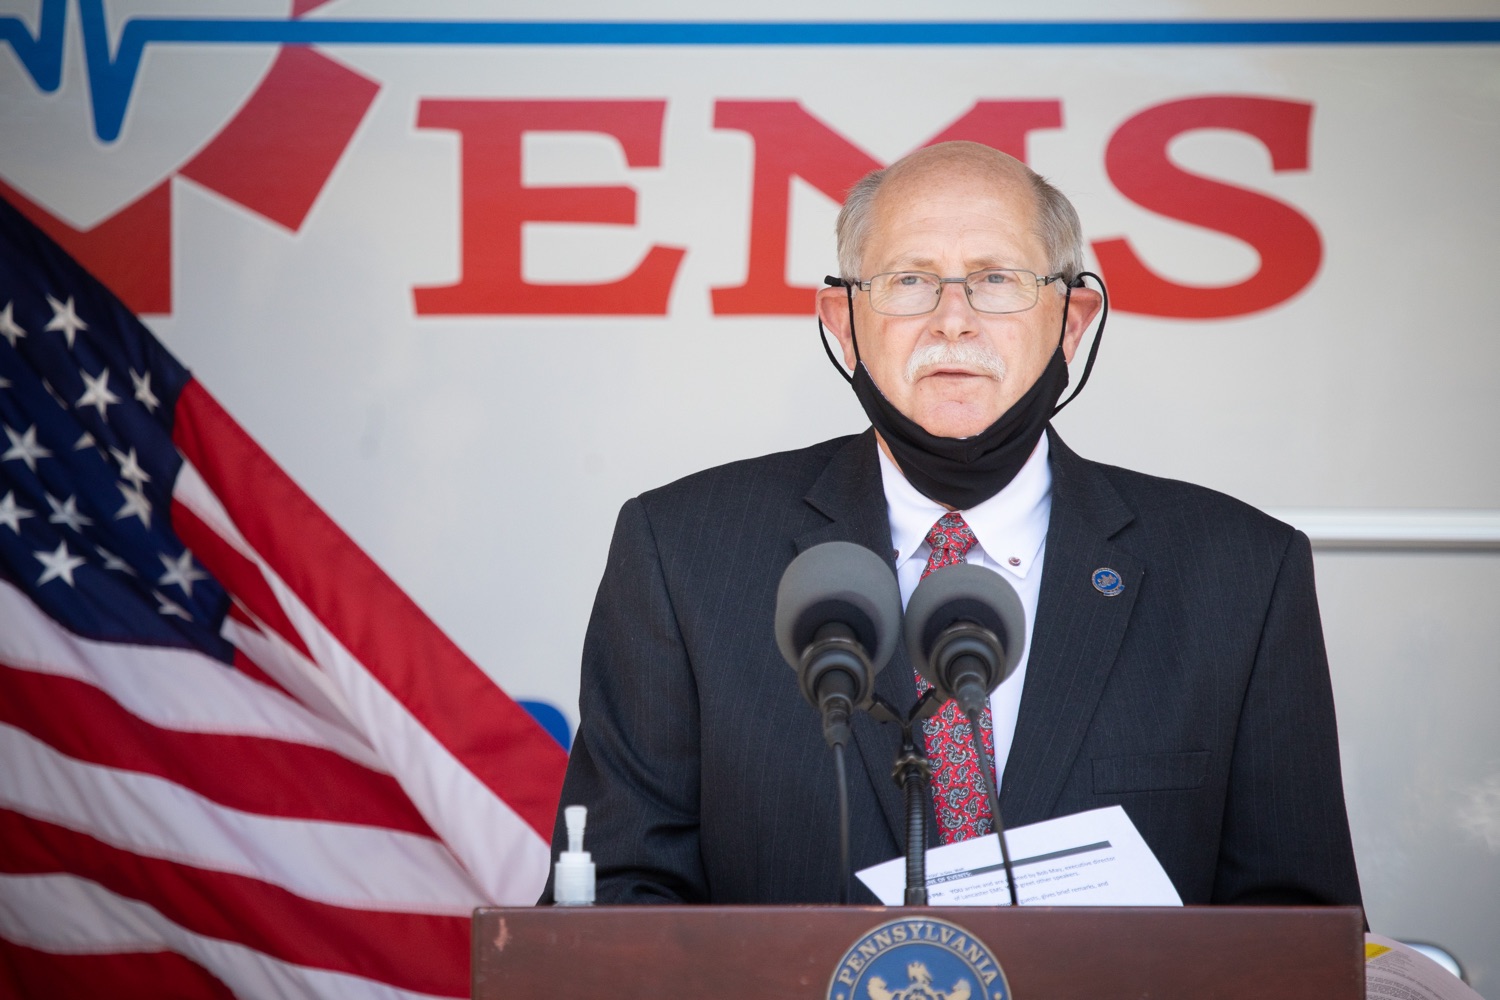 Pennsylvania State Fire Commissioner, Bruce Trego speaking to the press. Governor Tom Wolf visited the Millersville location of Lancaster EMS today to thank first responders and learn about how they are adapting their critical work during the states response to the COVID-19 pandemic.  Millersville, PA  July 30, 2020<br><a href="https://filesource.amperwave.net/commonwealthofpa/photo/18180_gov_first_responders_dz_007.jpg" target="_blank">⇣ Download Photo</a>